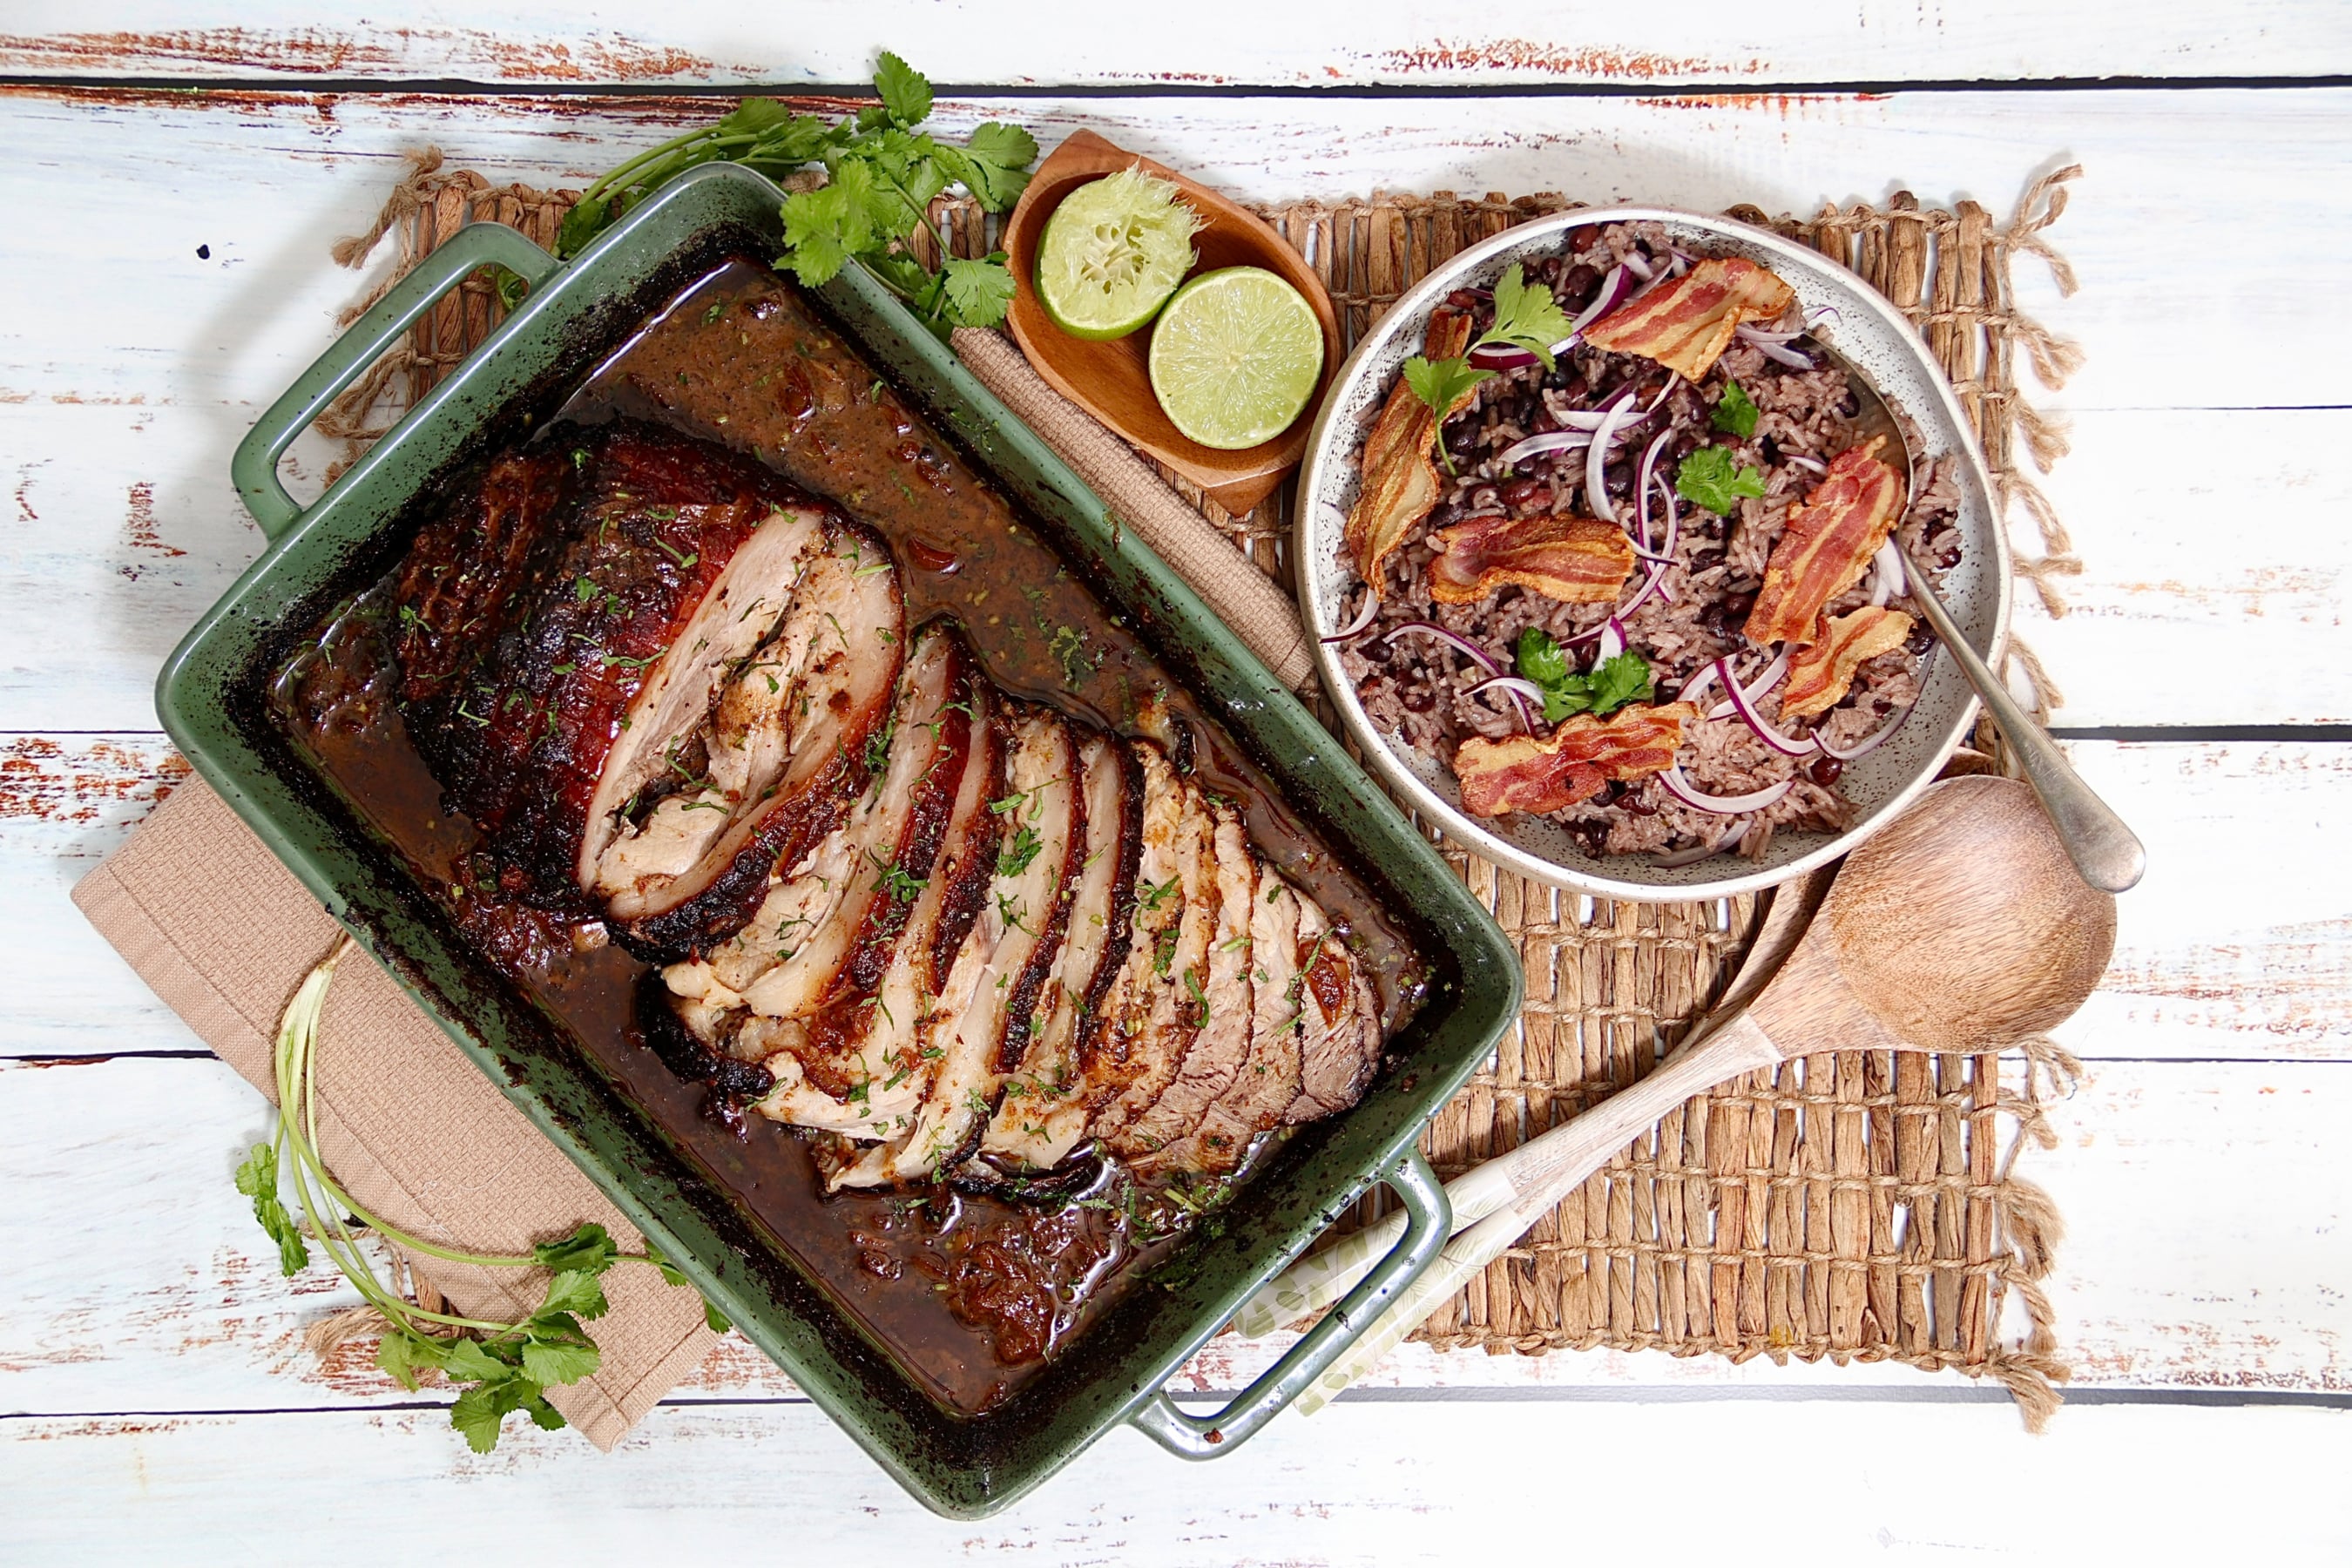 Slow Roasted Cuban Style Mojo Pork with a side on Congri Rice garnished with red onions, bacon and coriander.